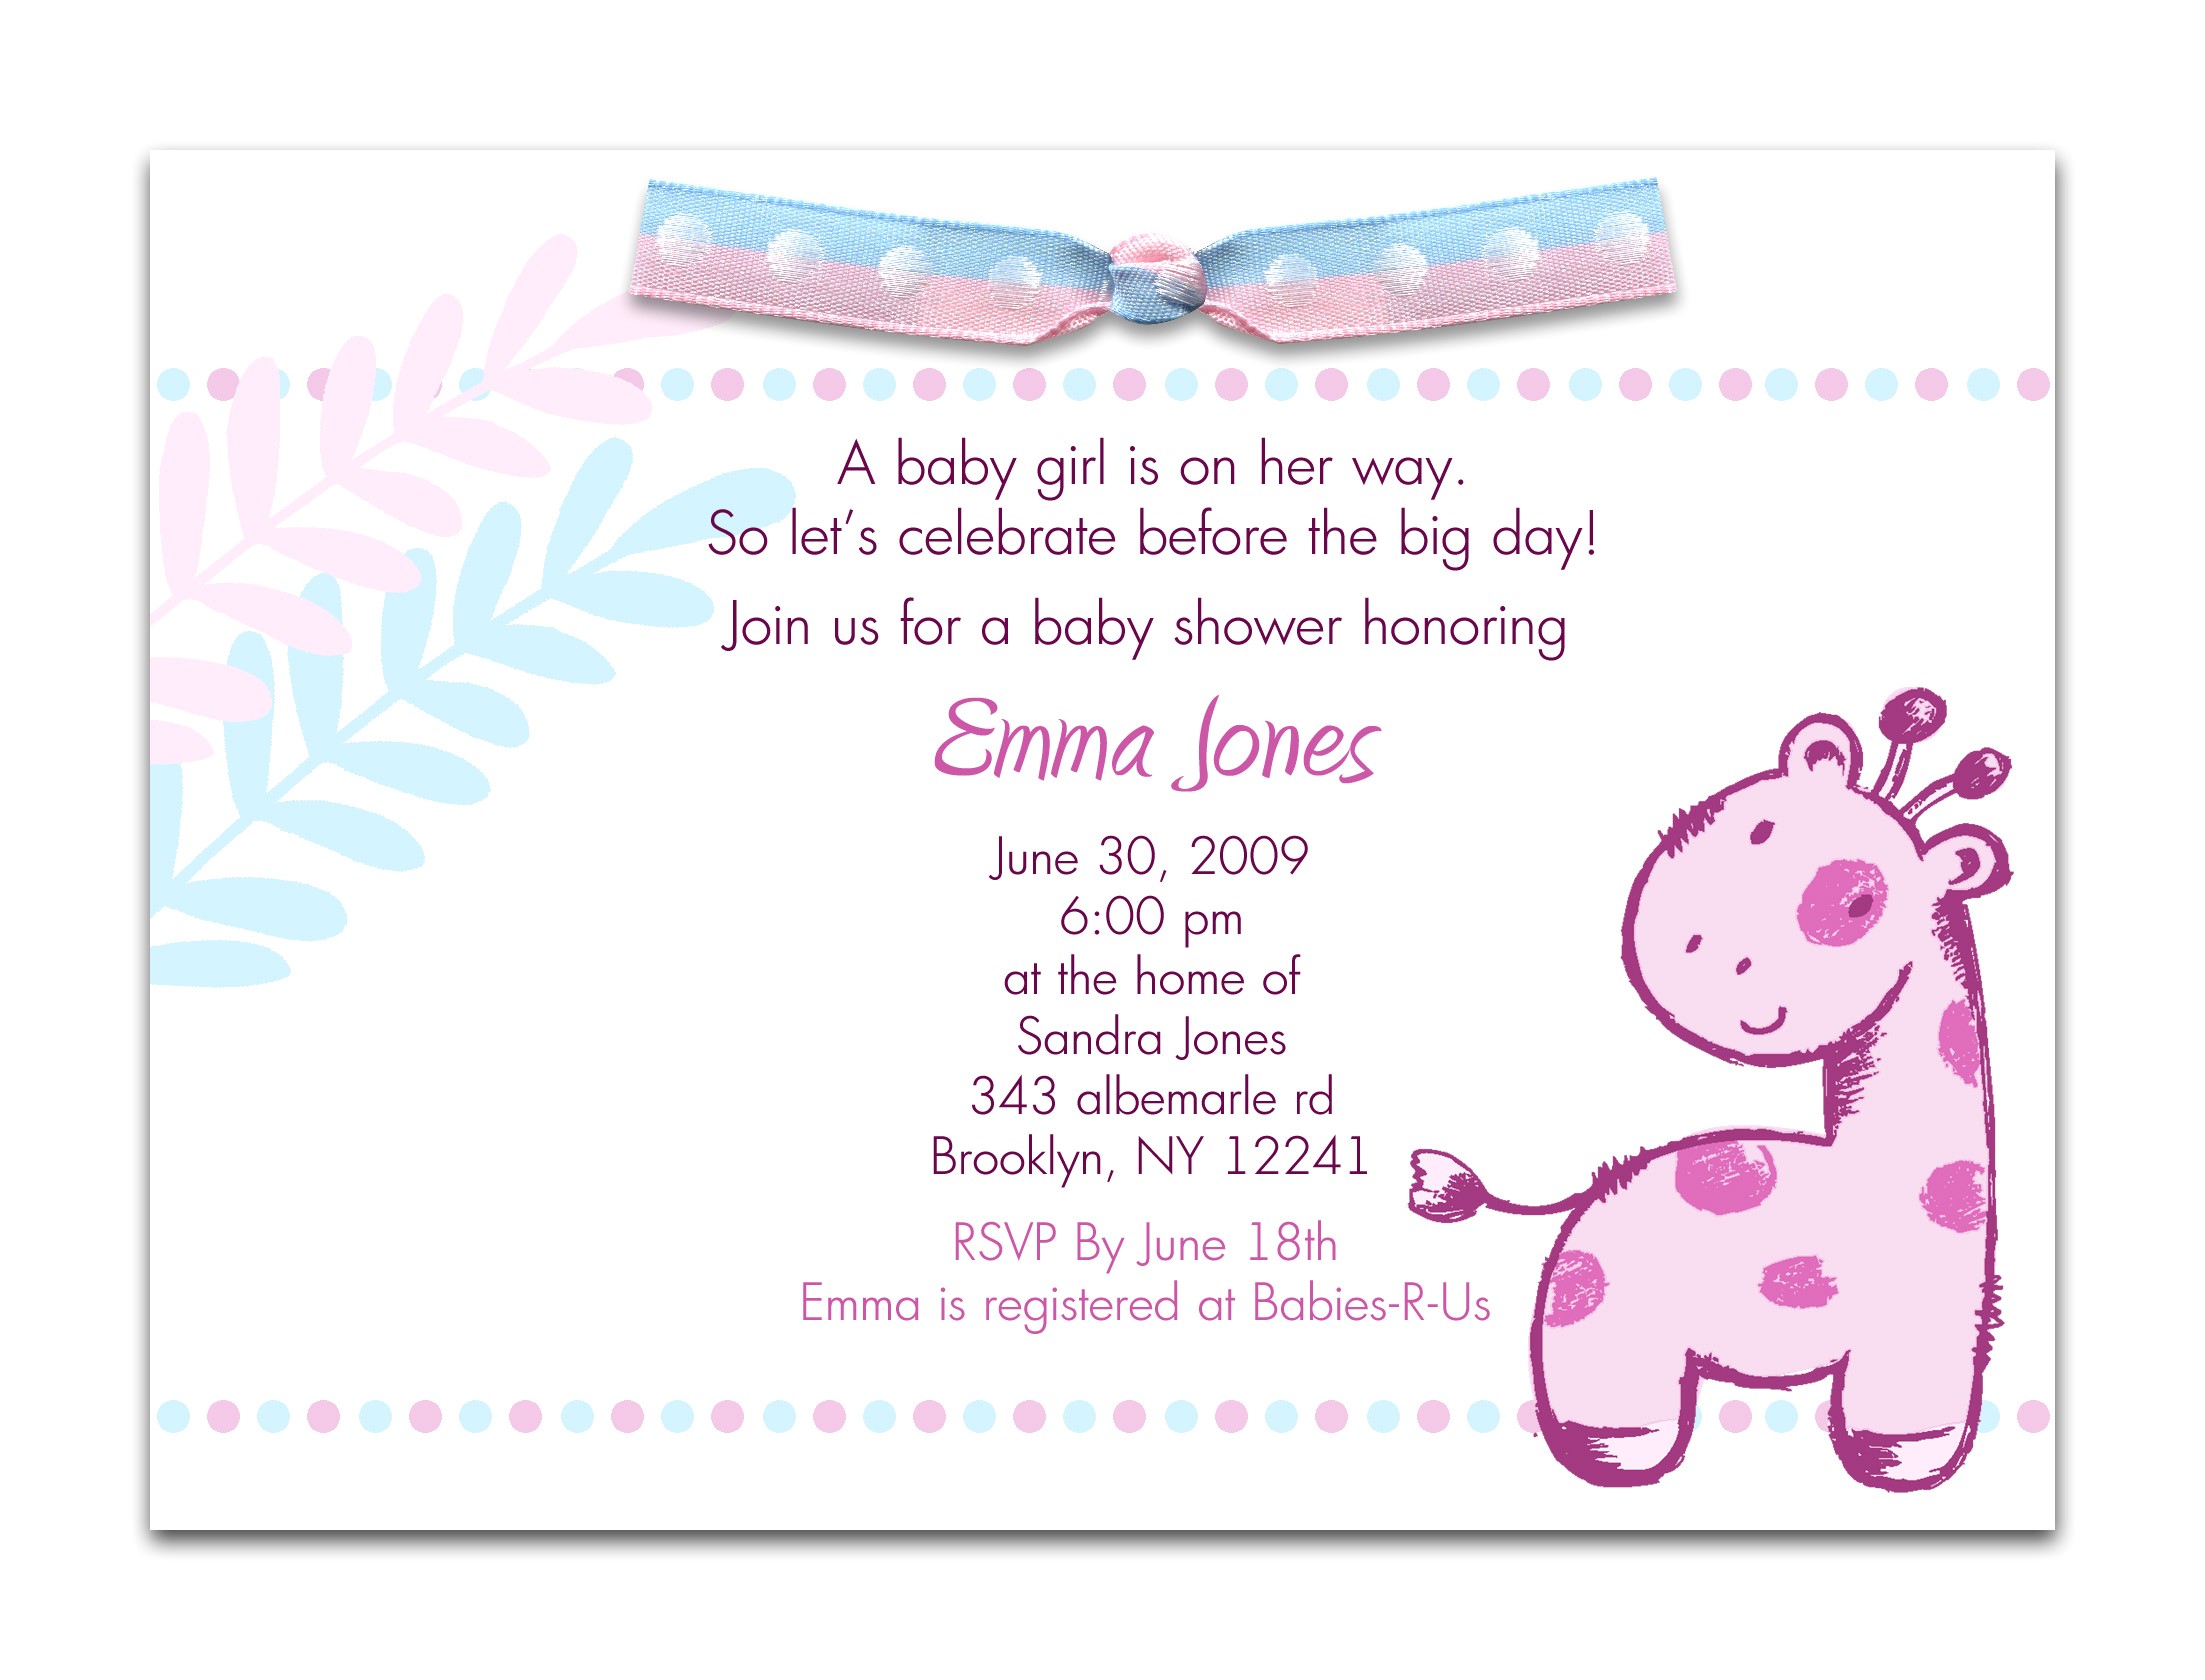 Invite to Baby Shower Wording Baby Shower Invitation Wording for A Girl theruntime Com